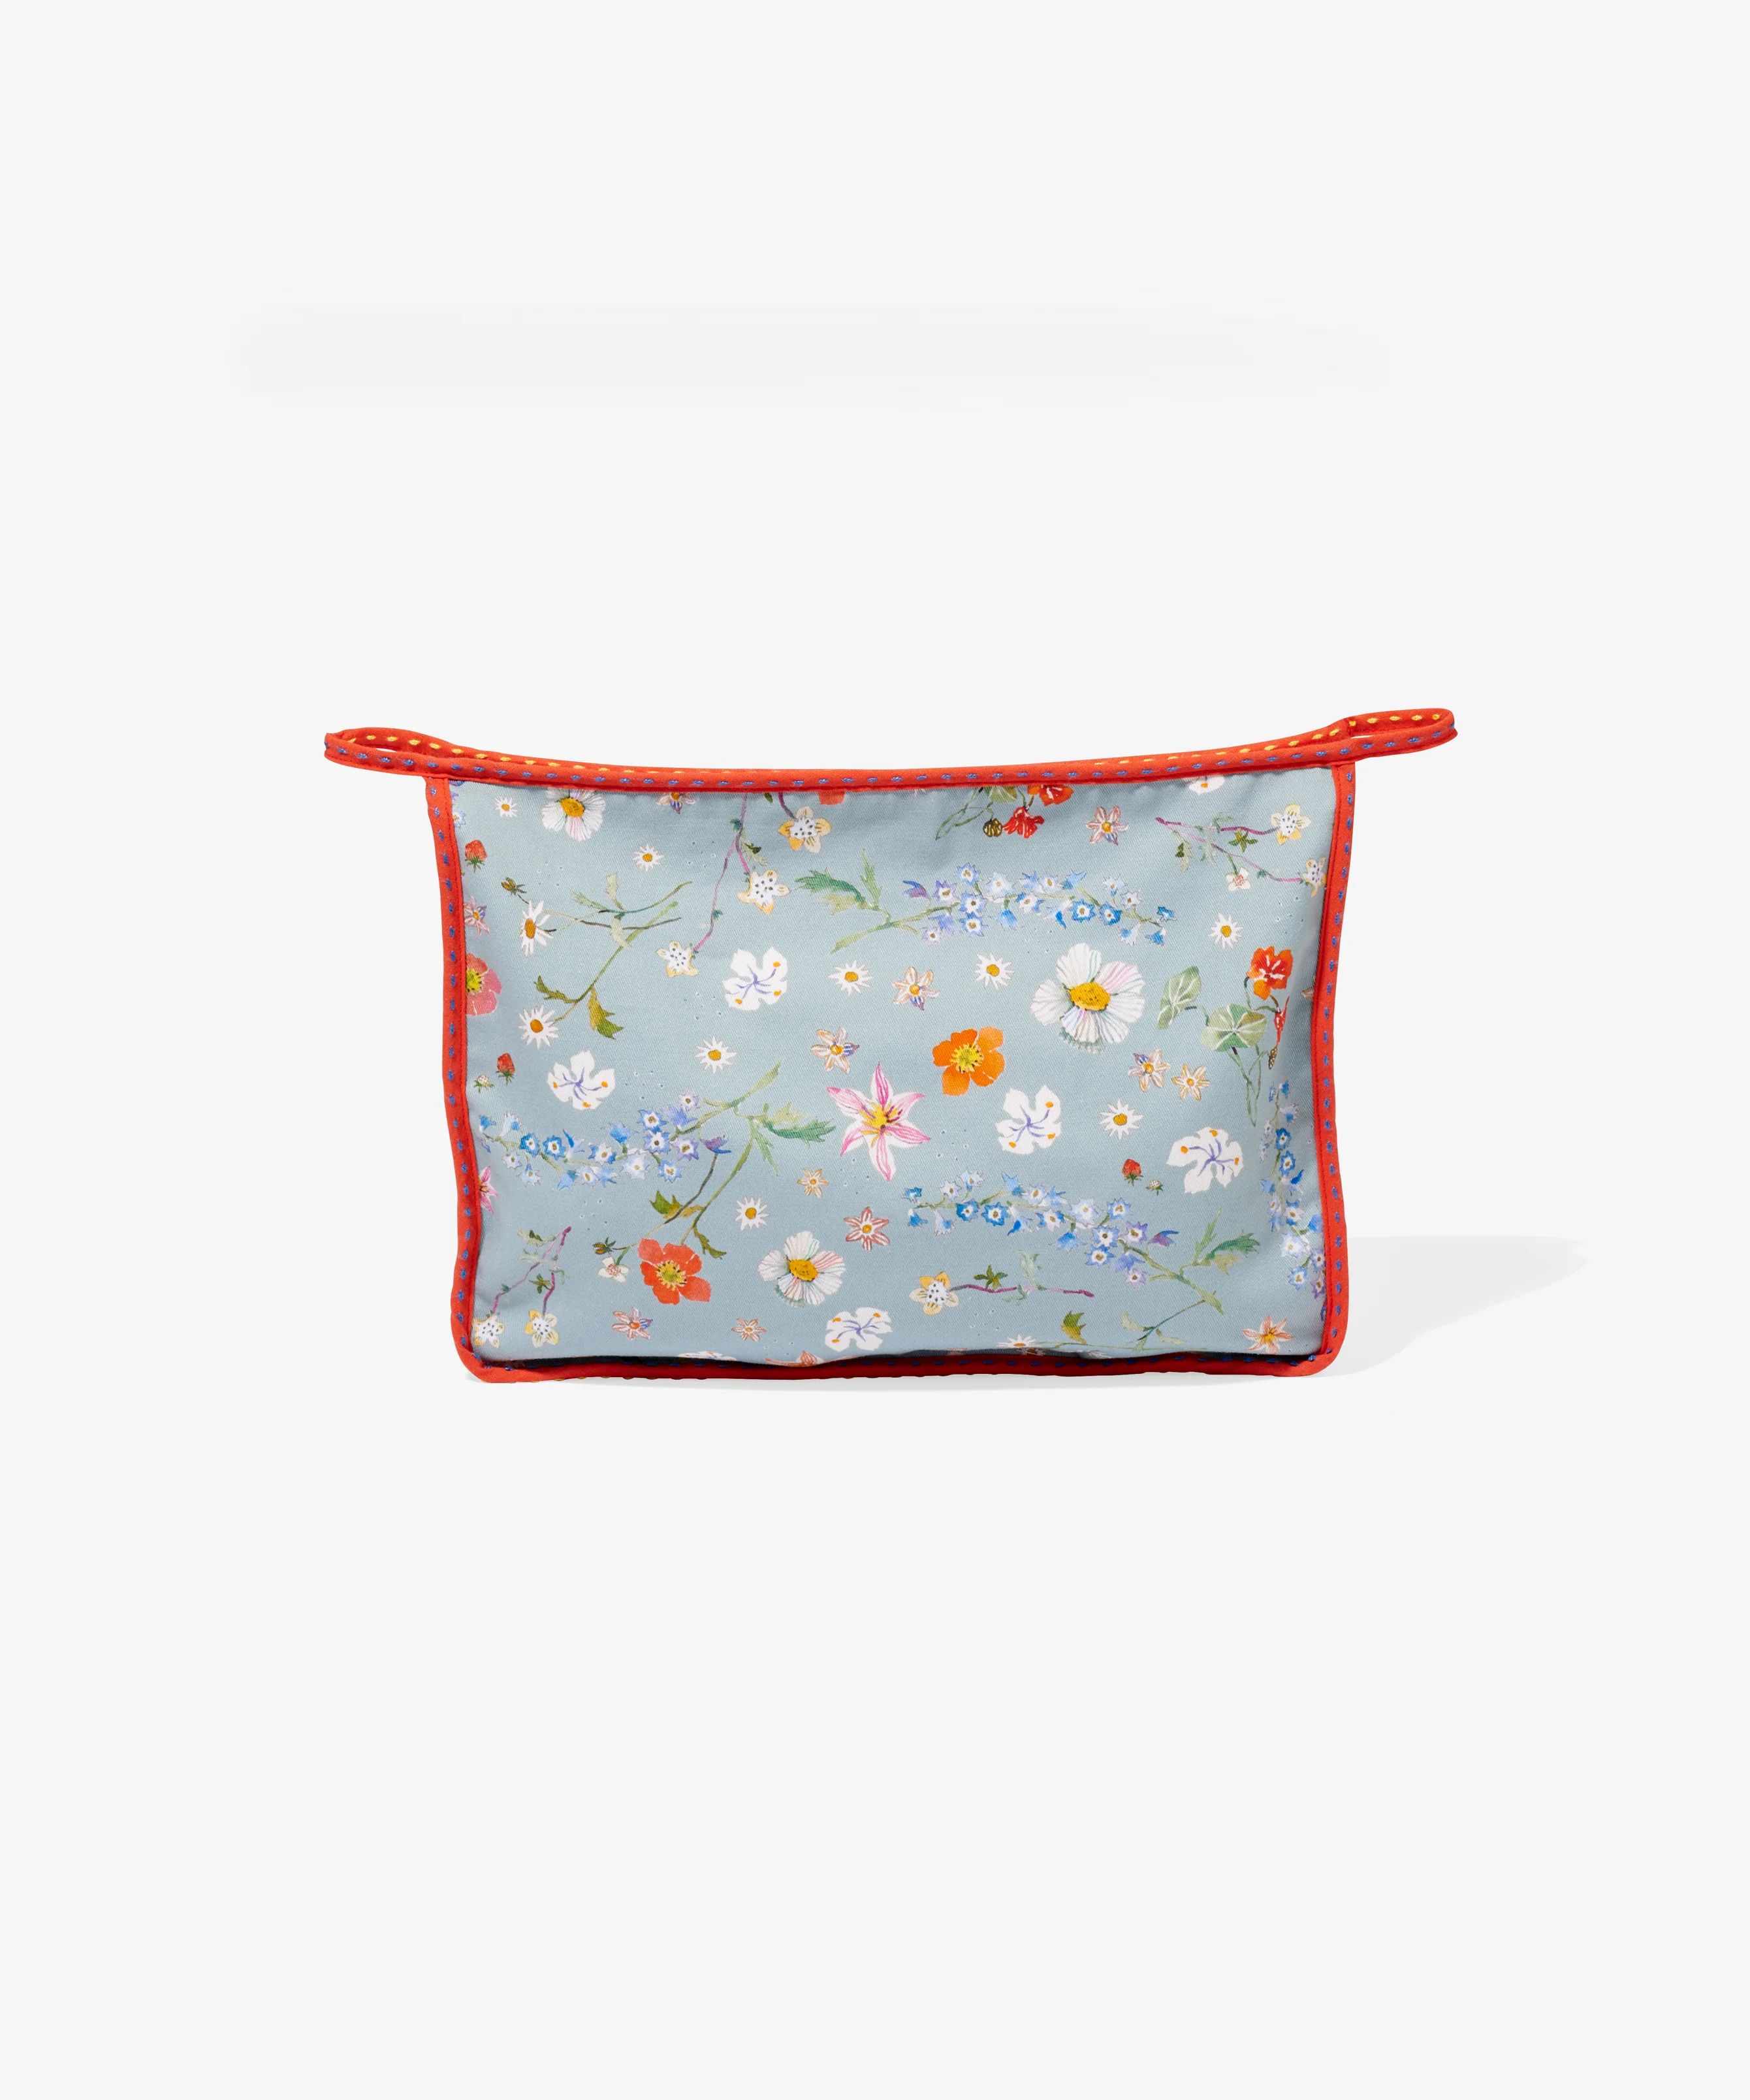 Large Zip Monogrammed Bag In Light Floral | Oso & Me | Oso & Me